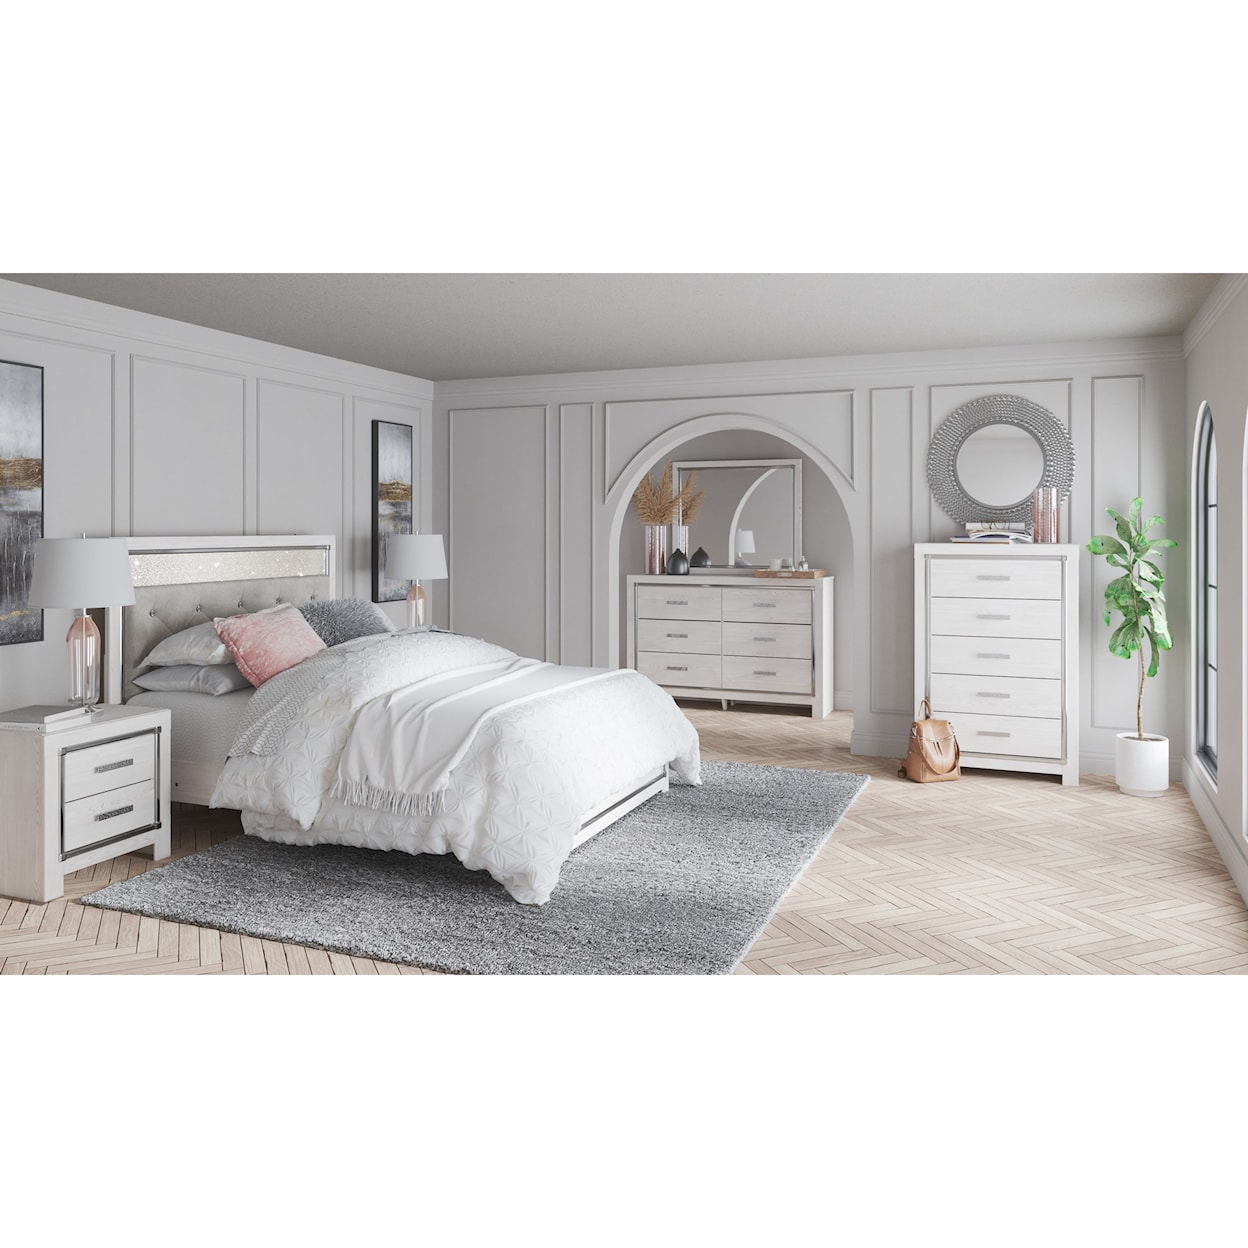 Signature Design by Ashley Altyra 7PC Queen Bedroom Group